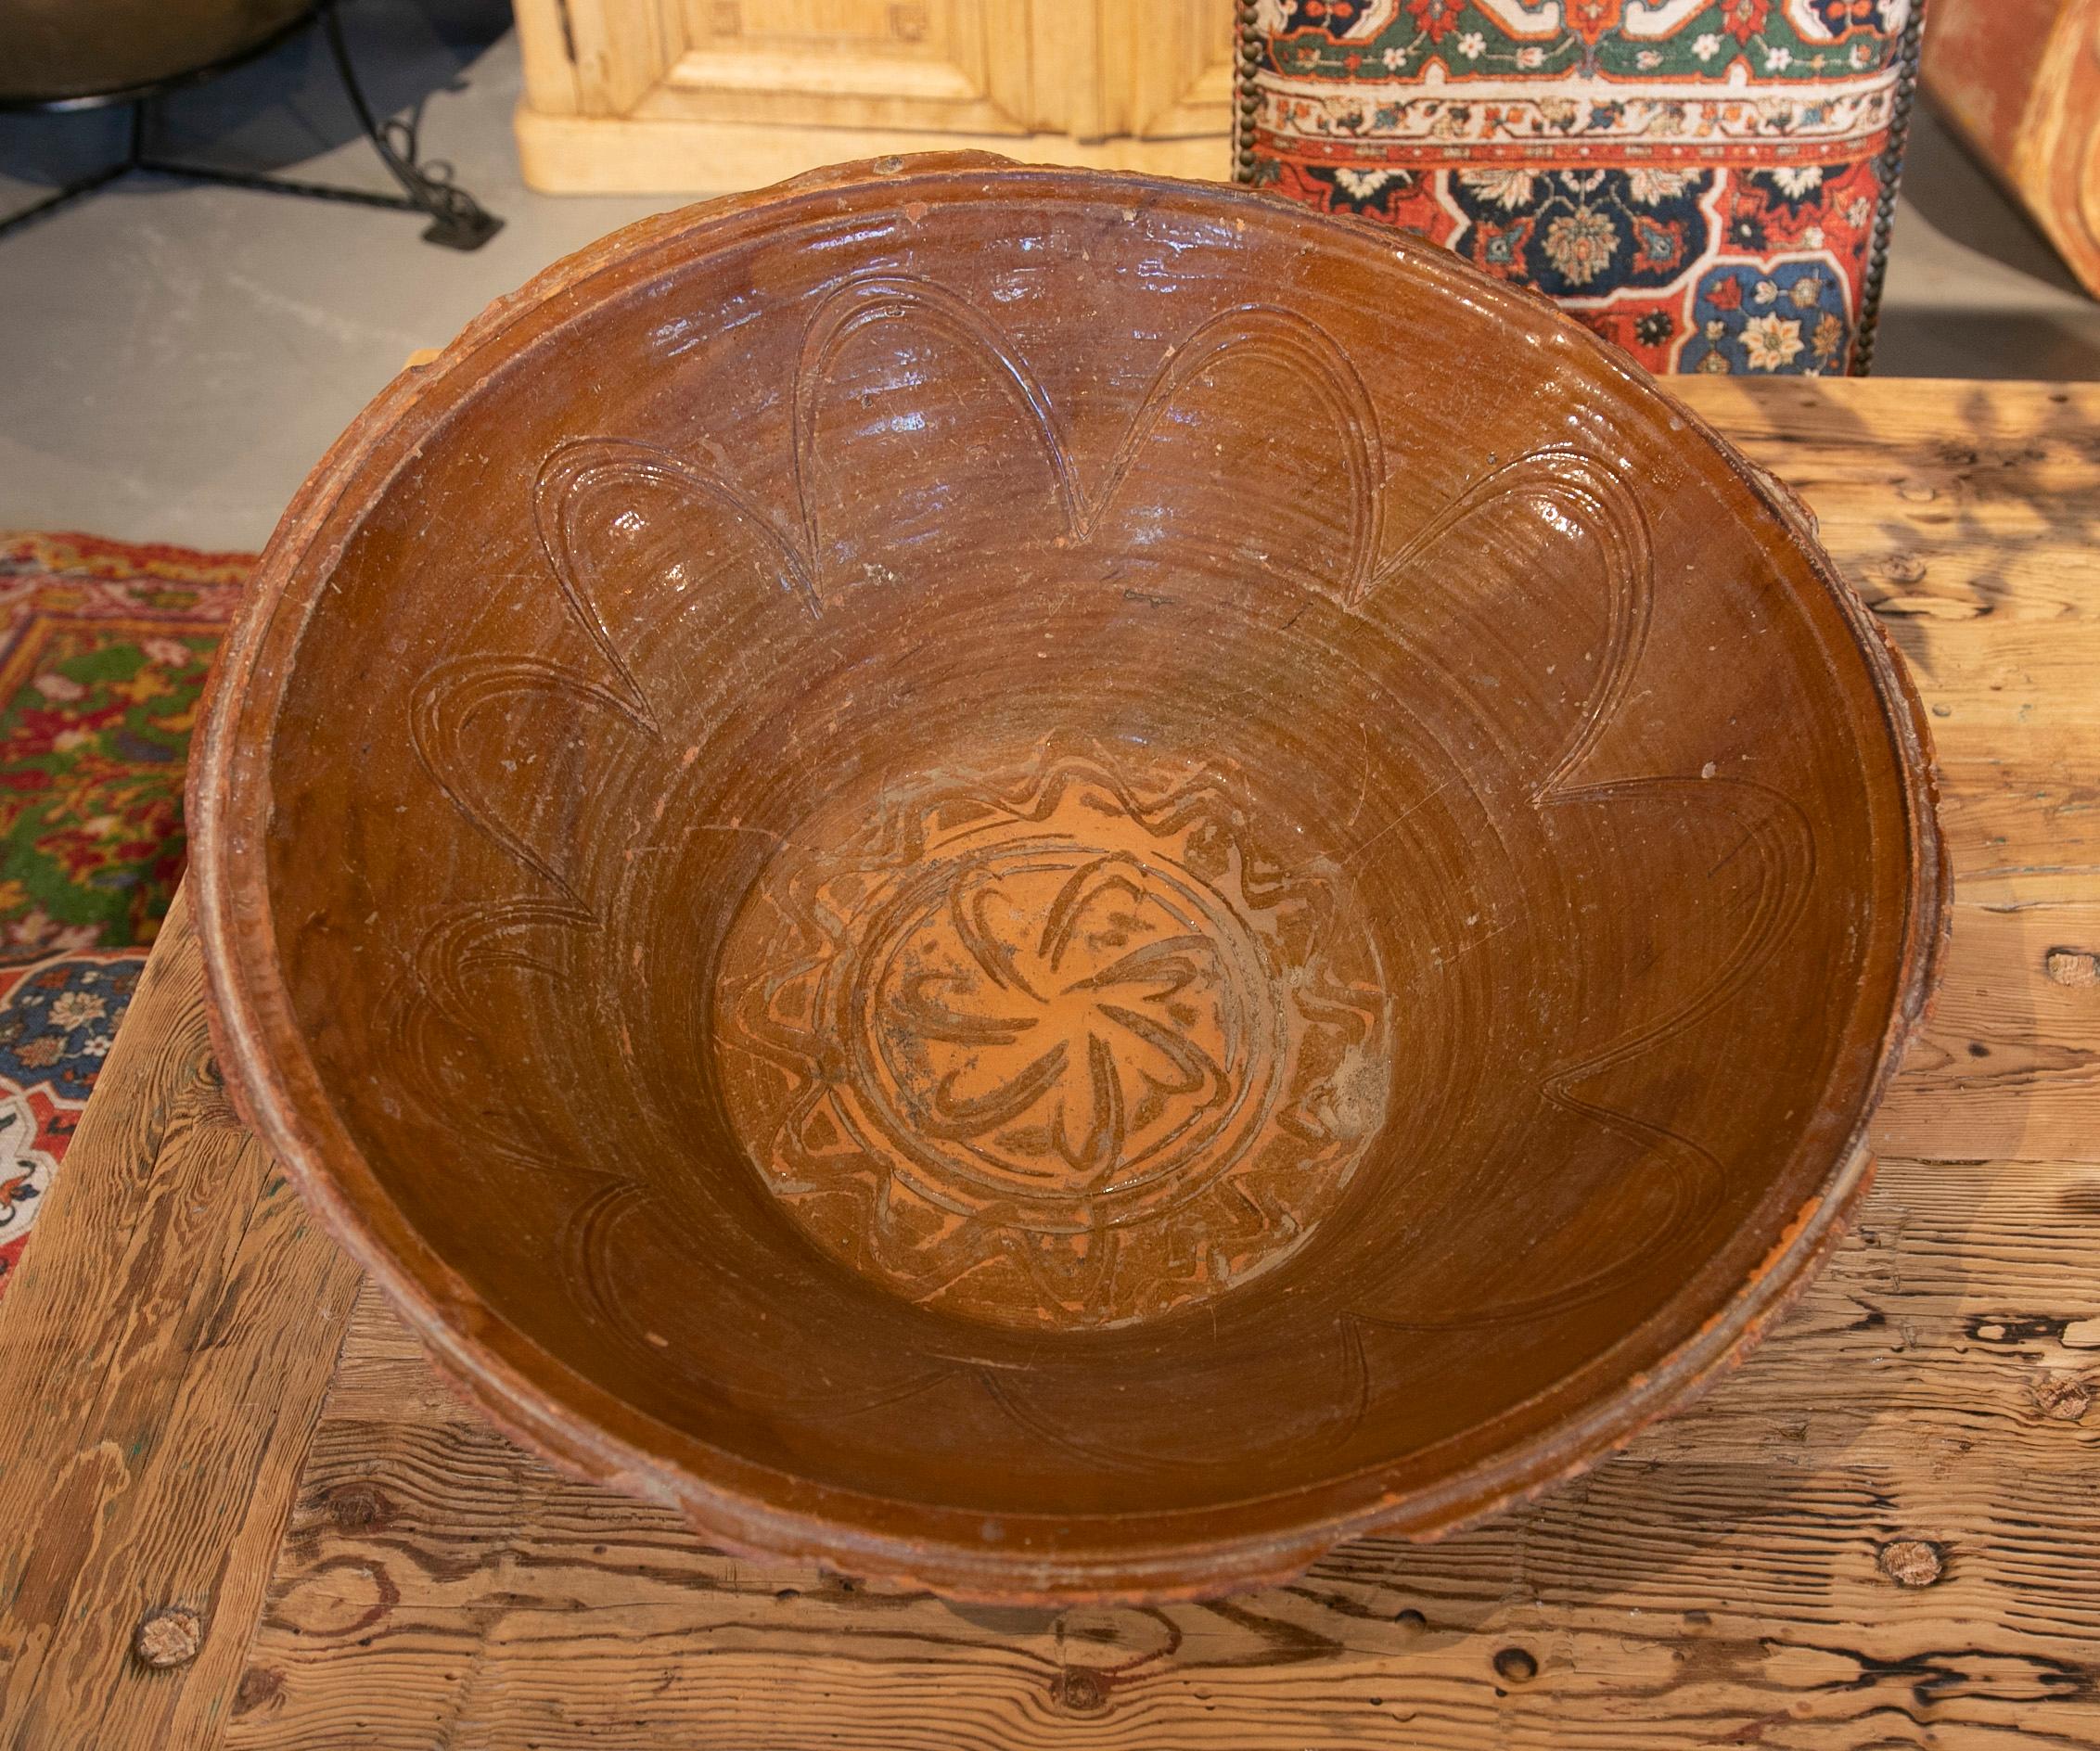 Spanish small basin of glazed ceramic in brown decorated in the central part.